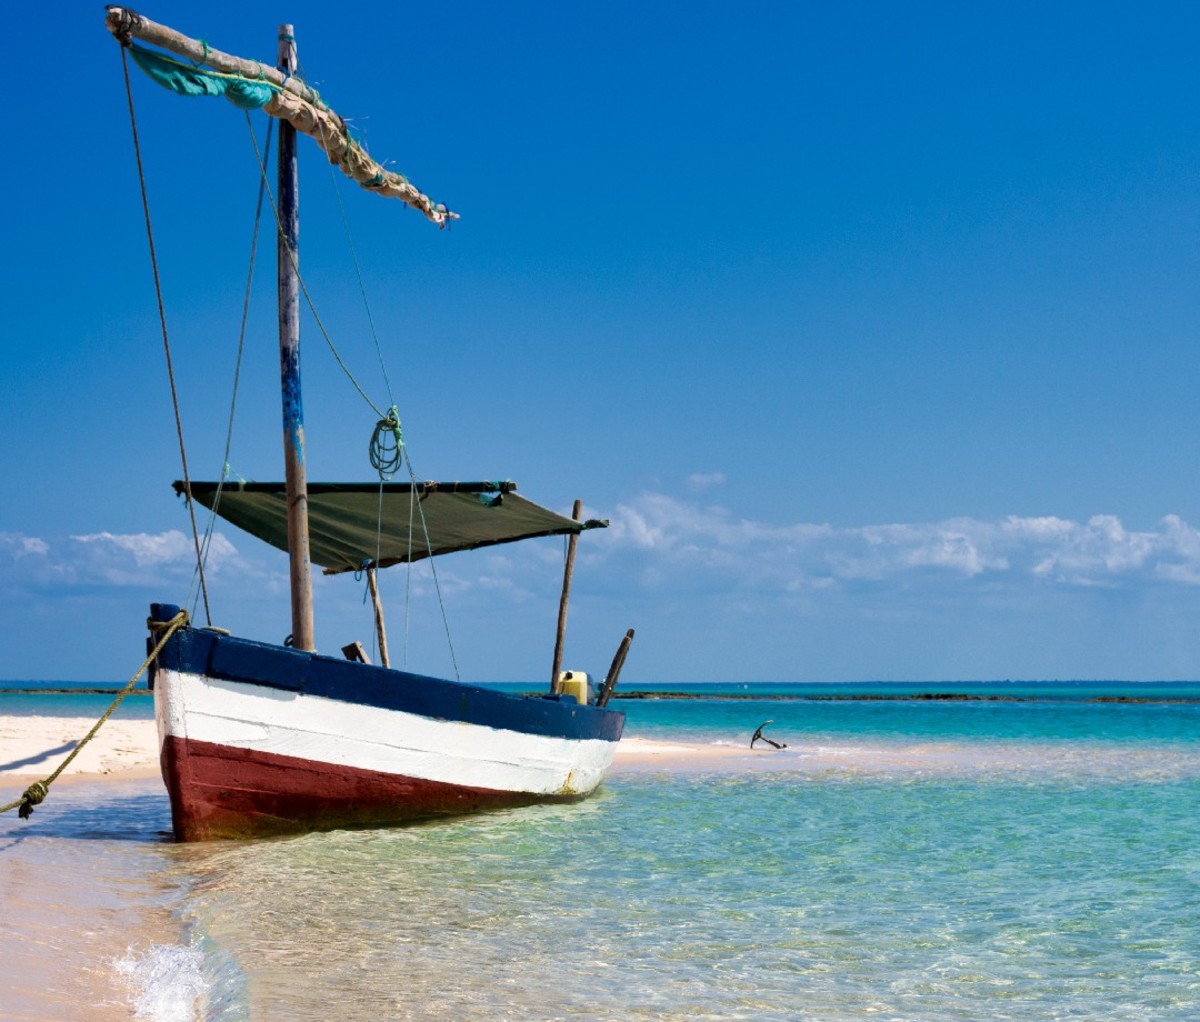 Dhow sailboat parked on a sandy shore in Mozambique.